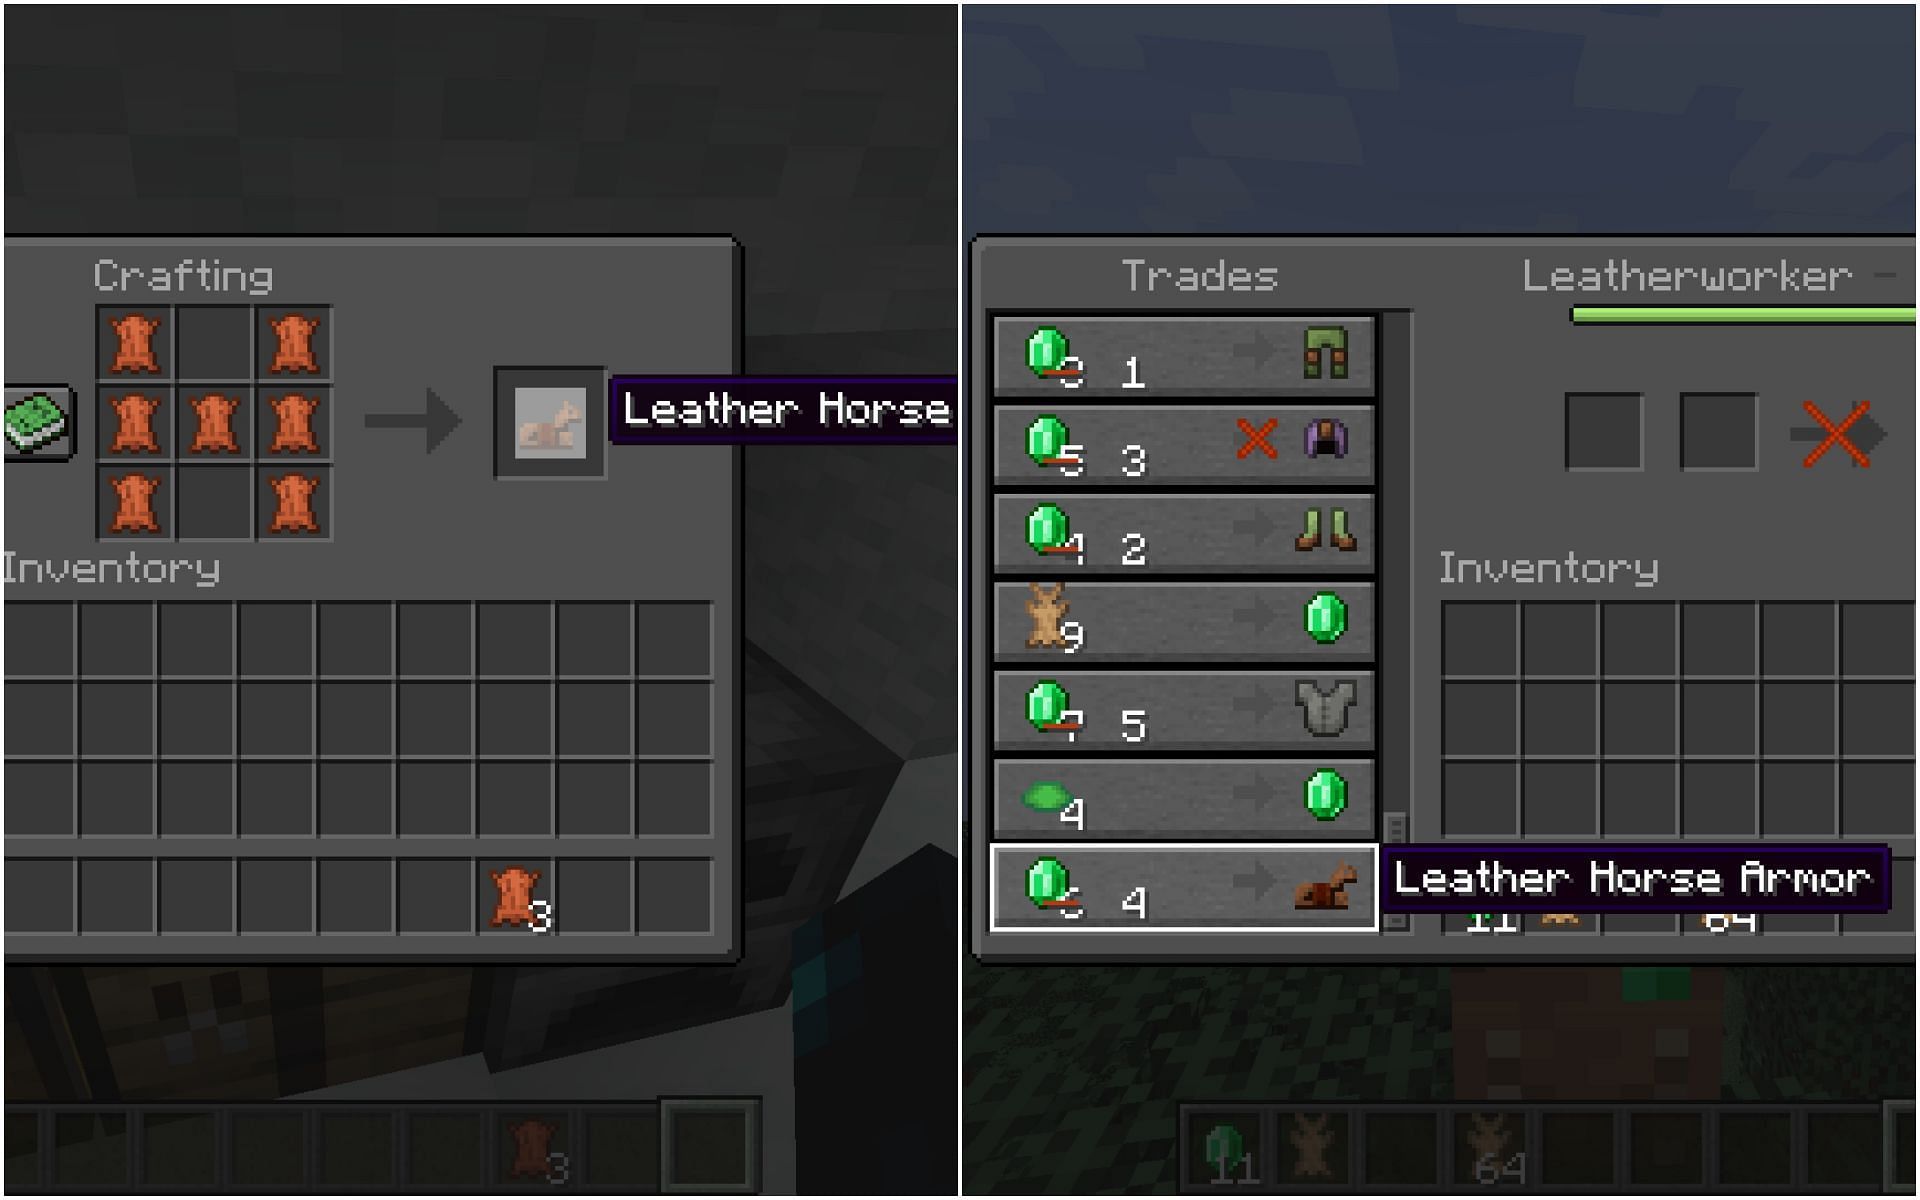 Leather horse armor can be crafted by Minecraft 1.19 players (Image via Mojang)